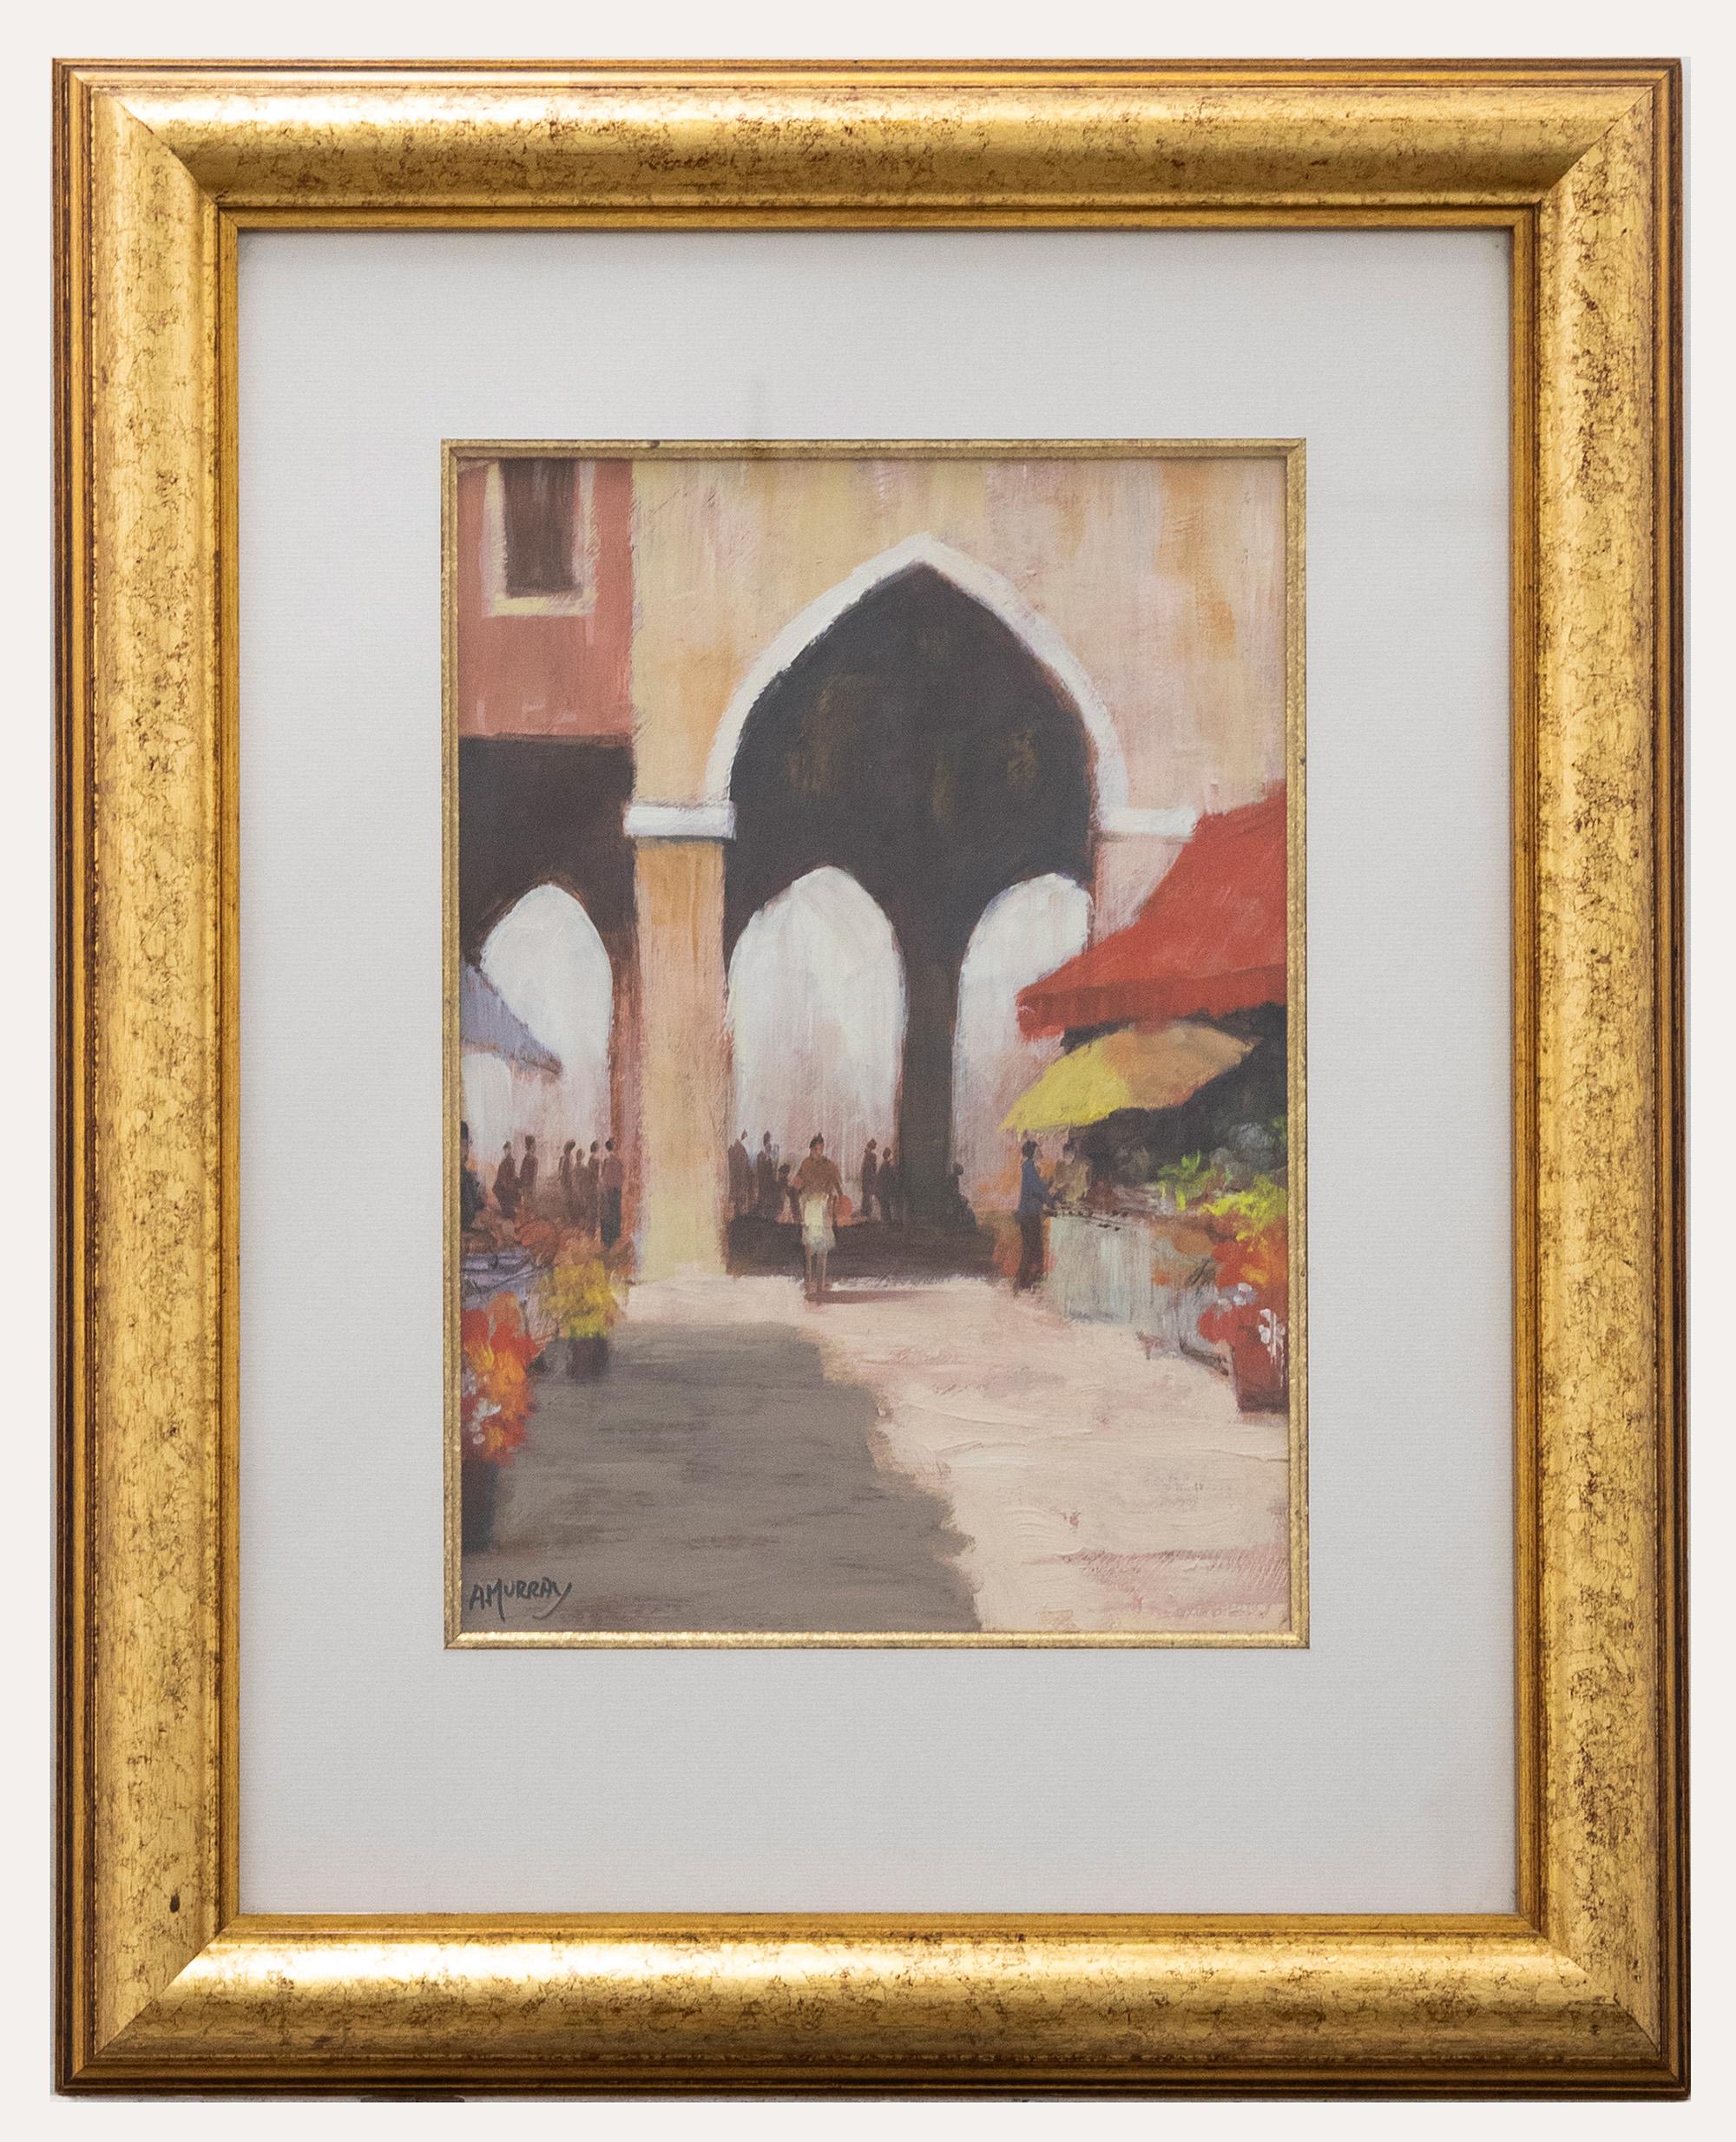 Unknown Landscape Painting - A. Murray - Framed 20th Century Oil, The Market Quarter